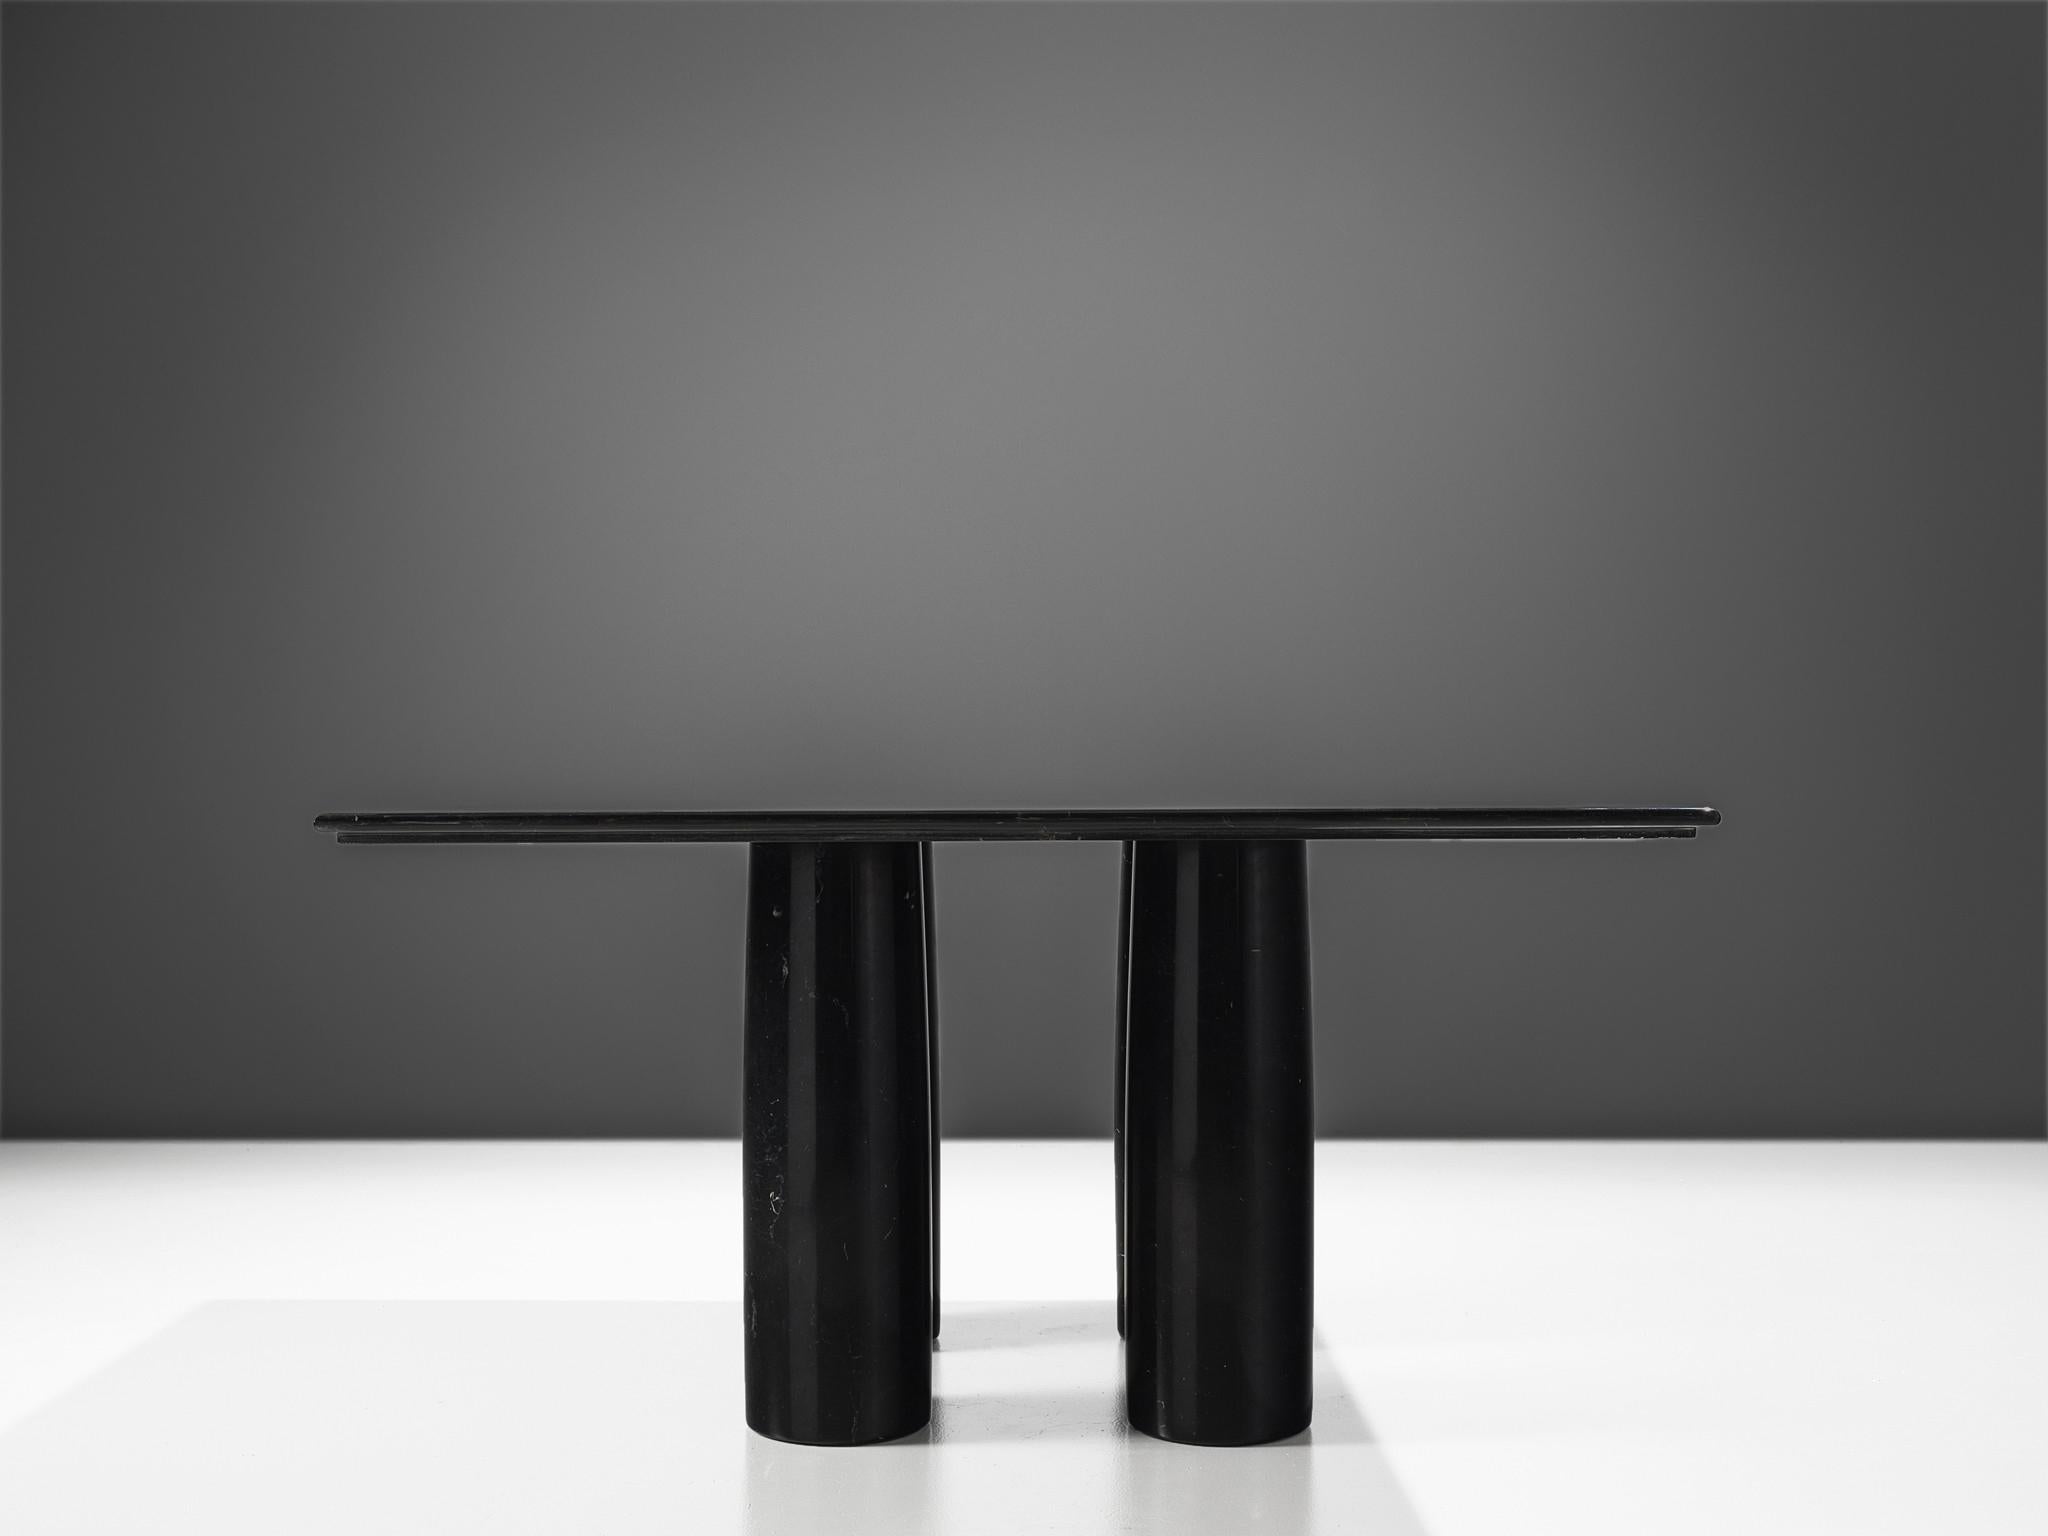 Mario Bellini for Cassina, dining table 'Il Colonnato', black marble, Italy, 1977

This 'Il Colonnato' dining table was designed by Italian designer Mario Bellini. For this series of tables, Bellini was inspired by ancient Roman columns. This center